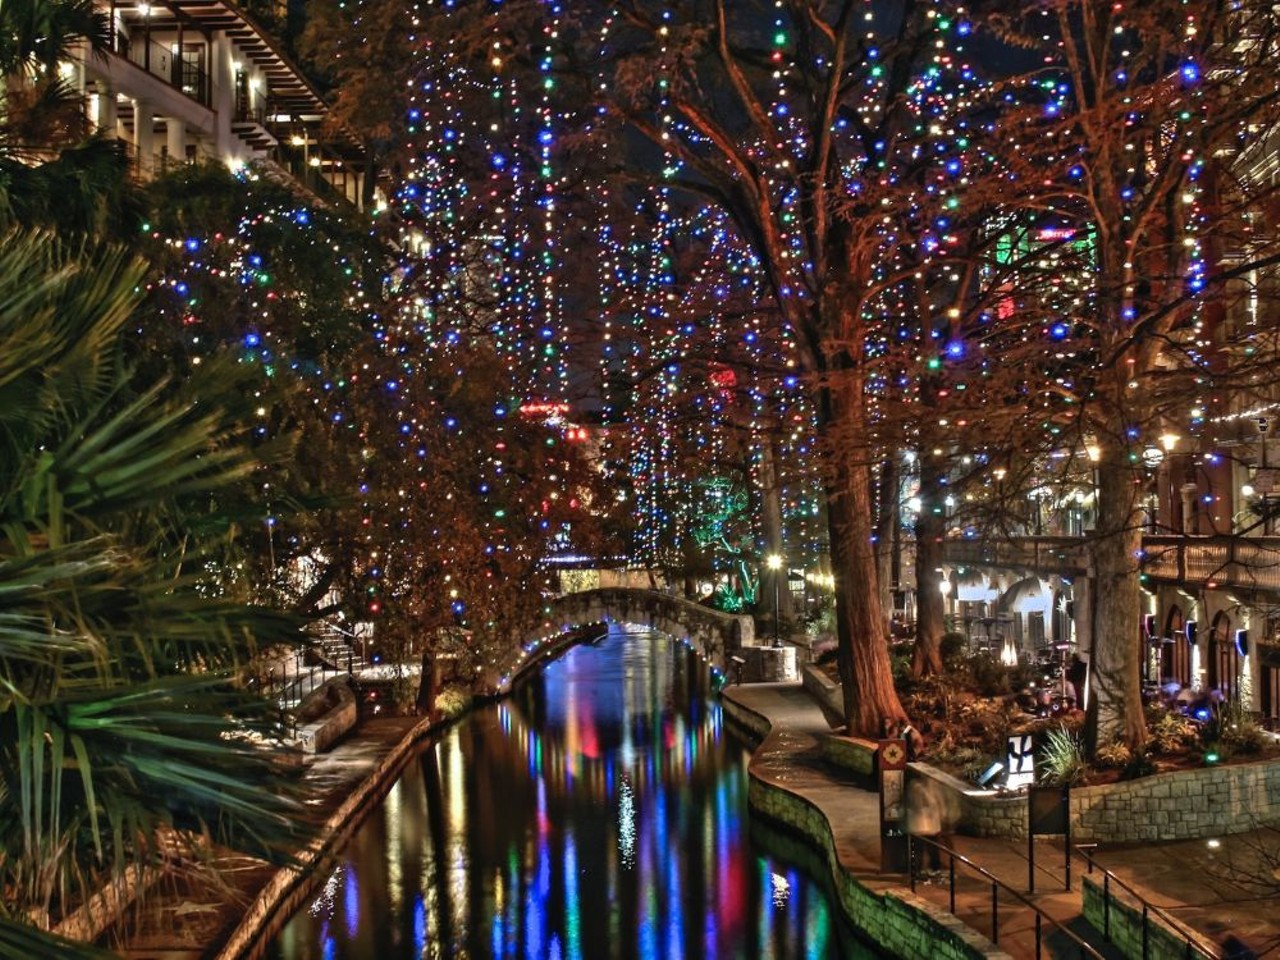 The River Walk
849 E. Commerce Street, (210) 227-4262, thesanantonioriverwalk.com
Want a super romantic date idea that won’t break the bank? Take your sweetheart to the River Walk and fall in love with the lights. The lights will be on every night from November 24-January 7, 2024, and special events like the Ford Fiesta de las Luminarias will take place on select weekends throughout December.